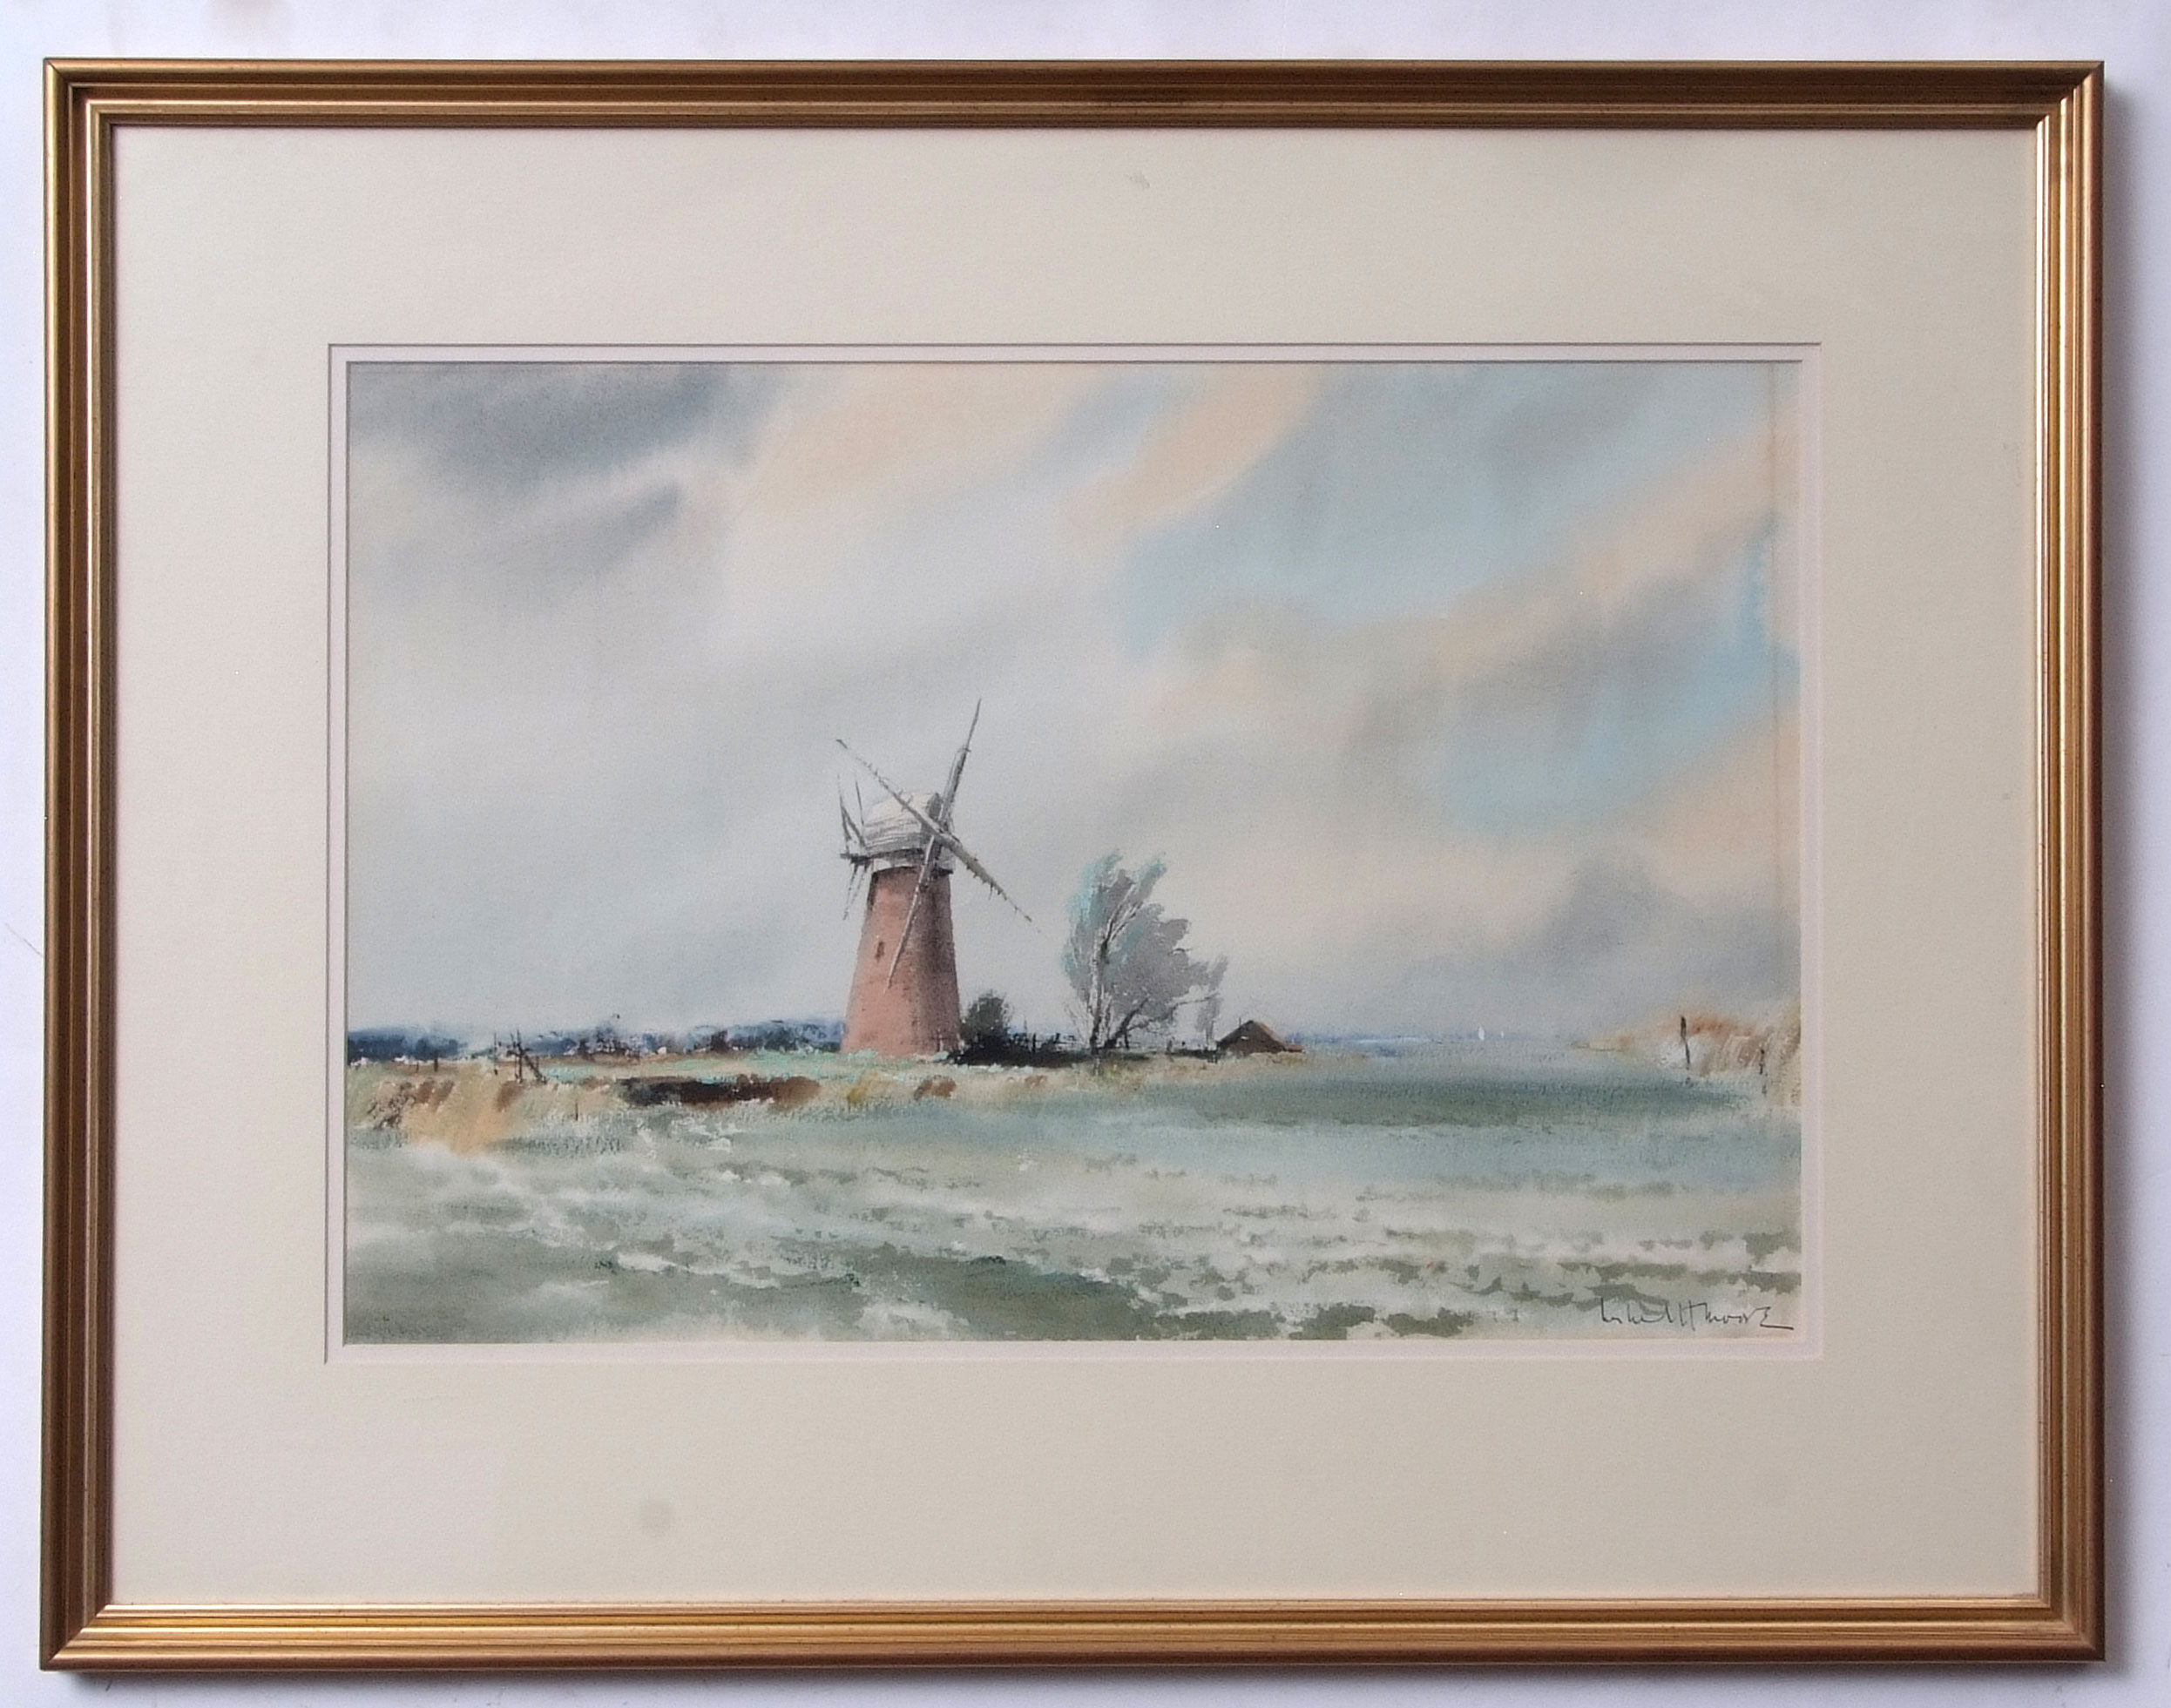 AR LESLIE L HARDY MOORE, RI, (1907-1997) "Thurne Mouth" watercolour, signed lower right